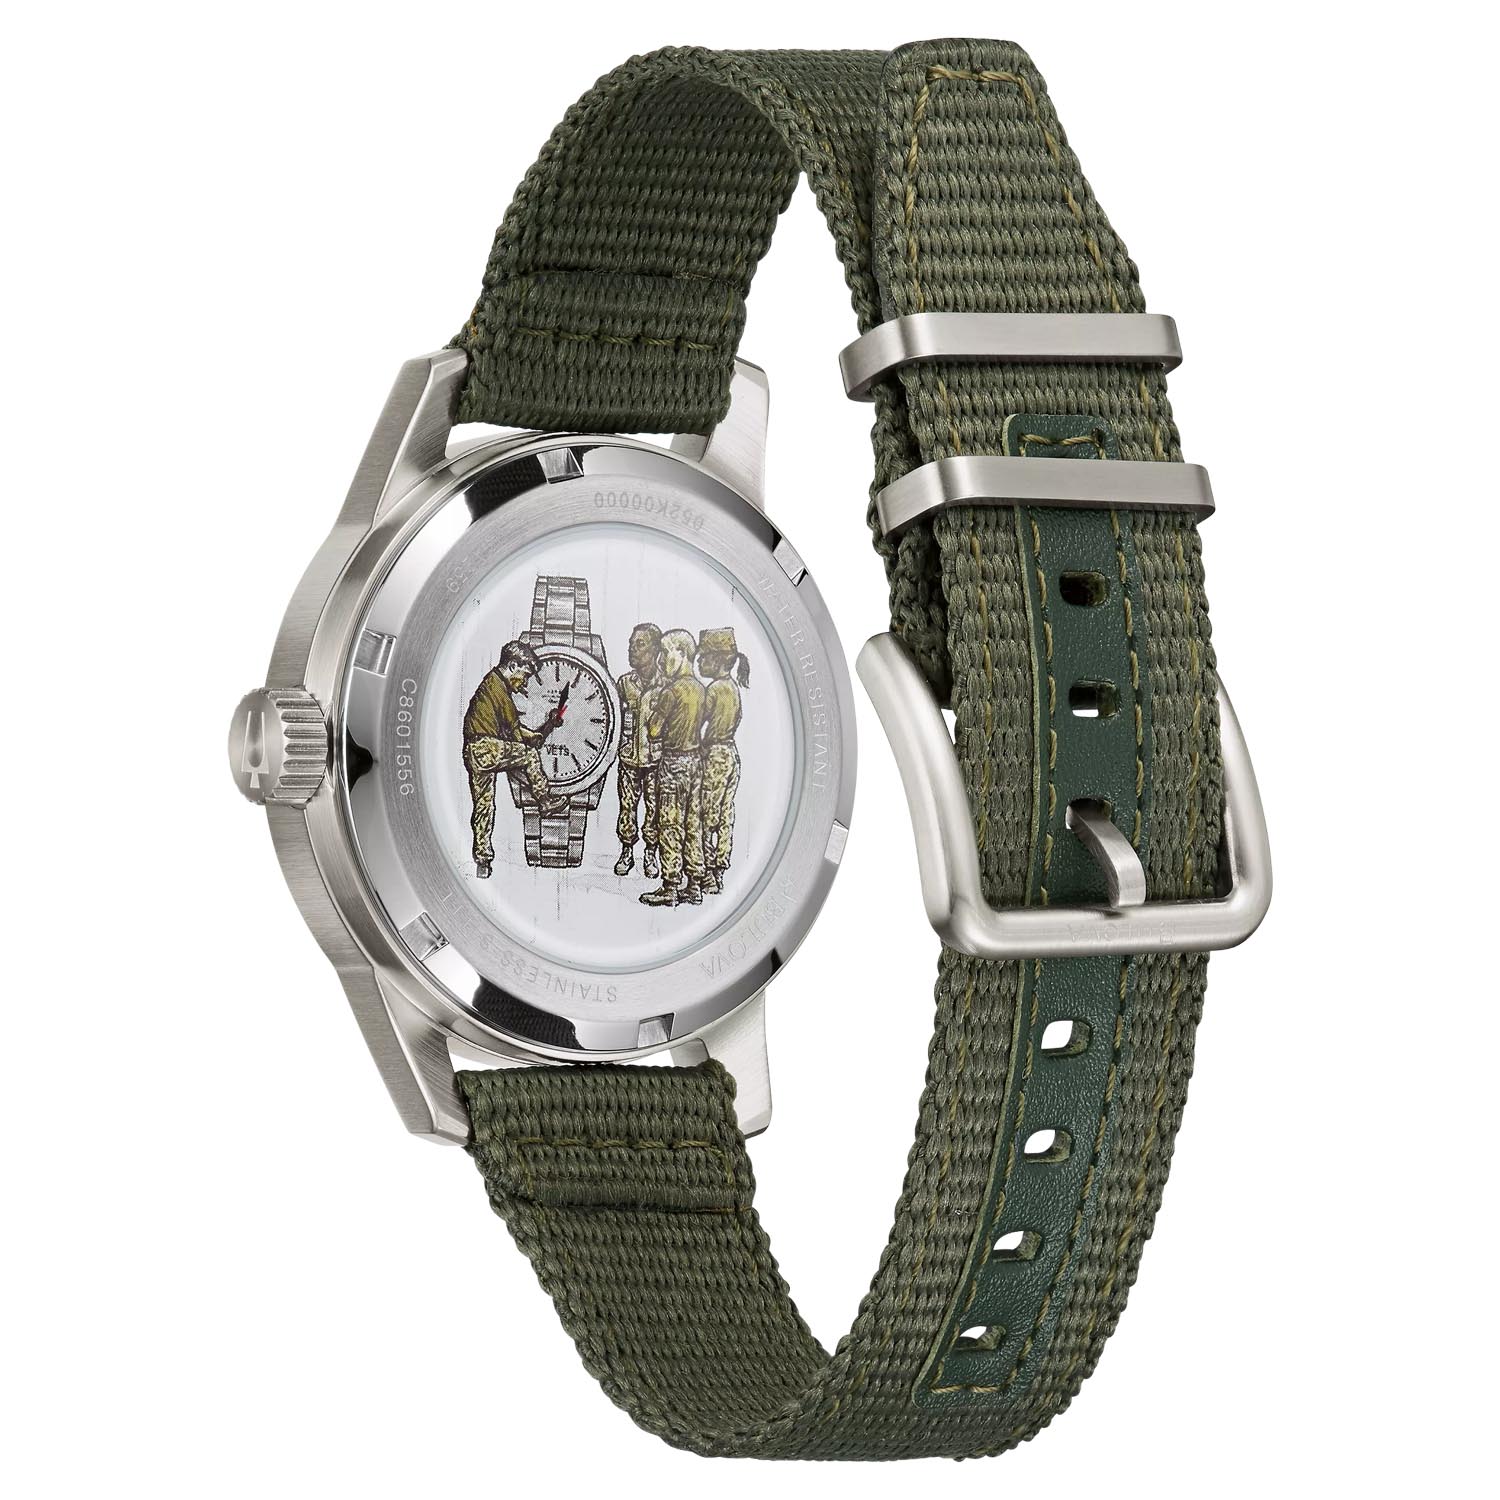 Bulova Hack Mens Watch with Black Dial and Olive Green Canvas Strap (automatic movement)